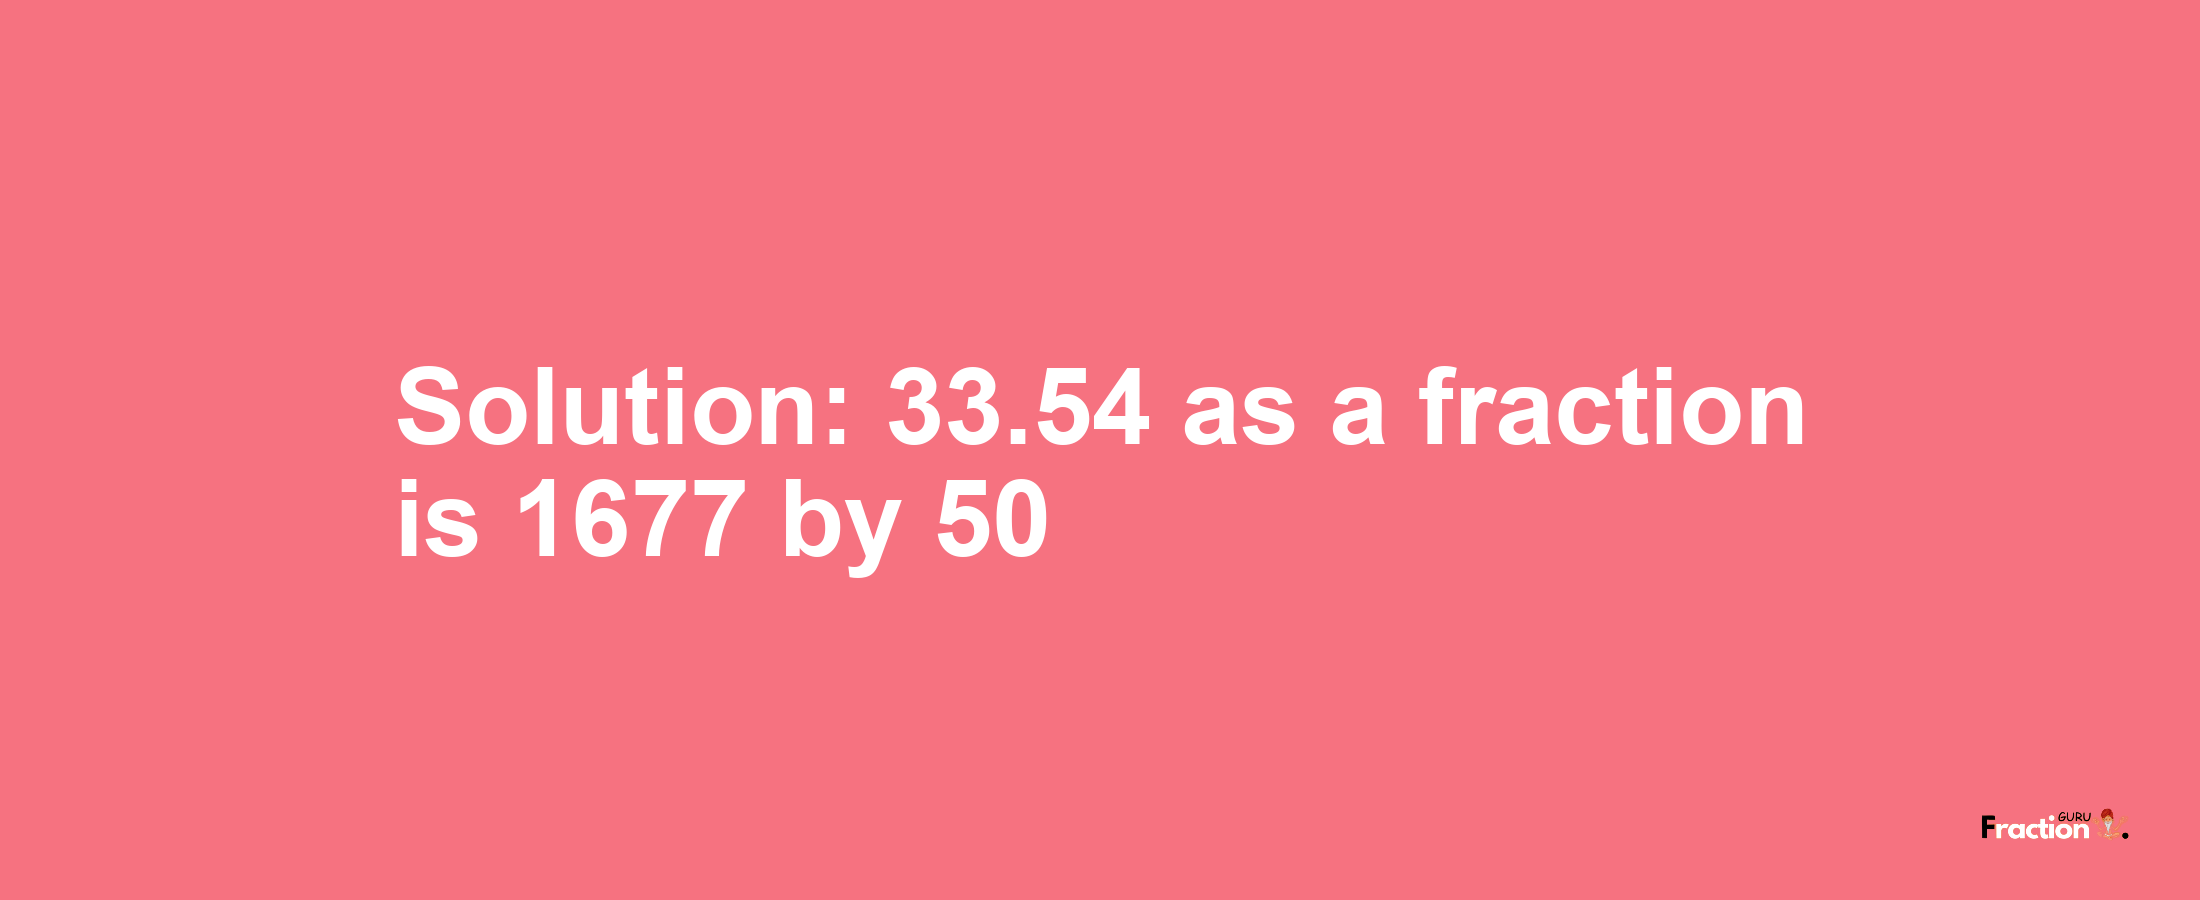 Solution:33.54 as a fraction is 1677/50